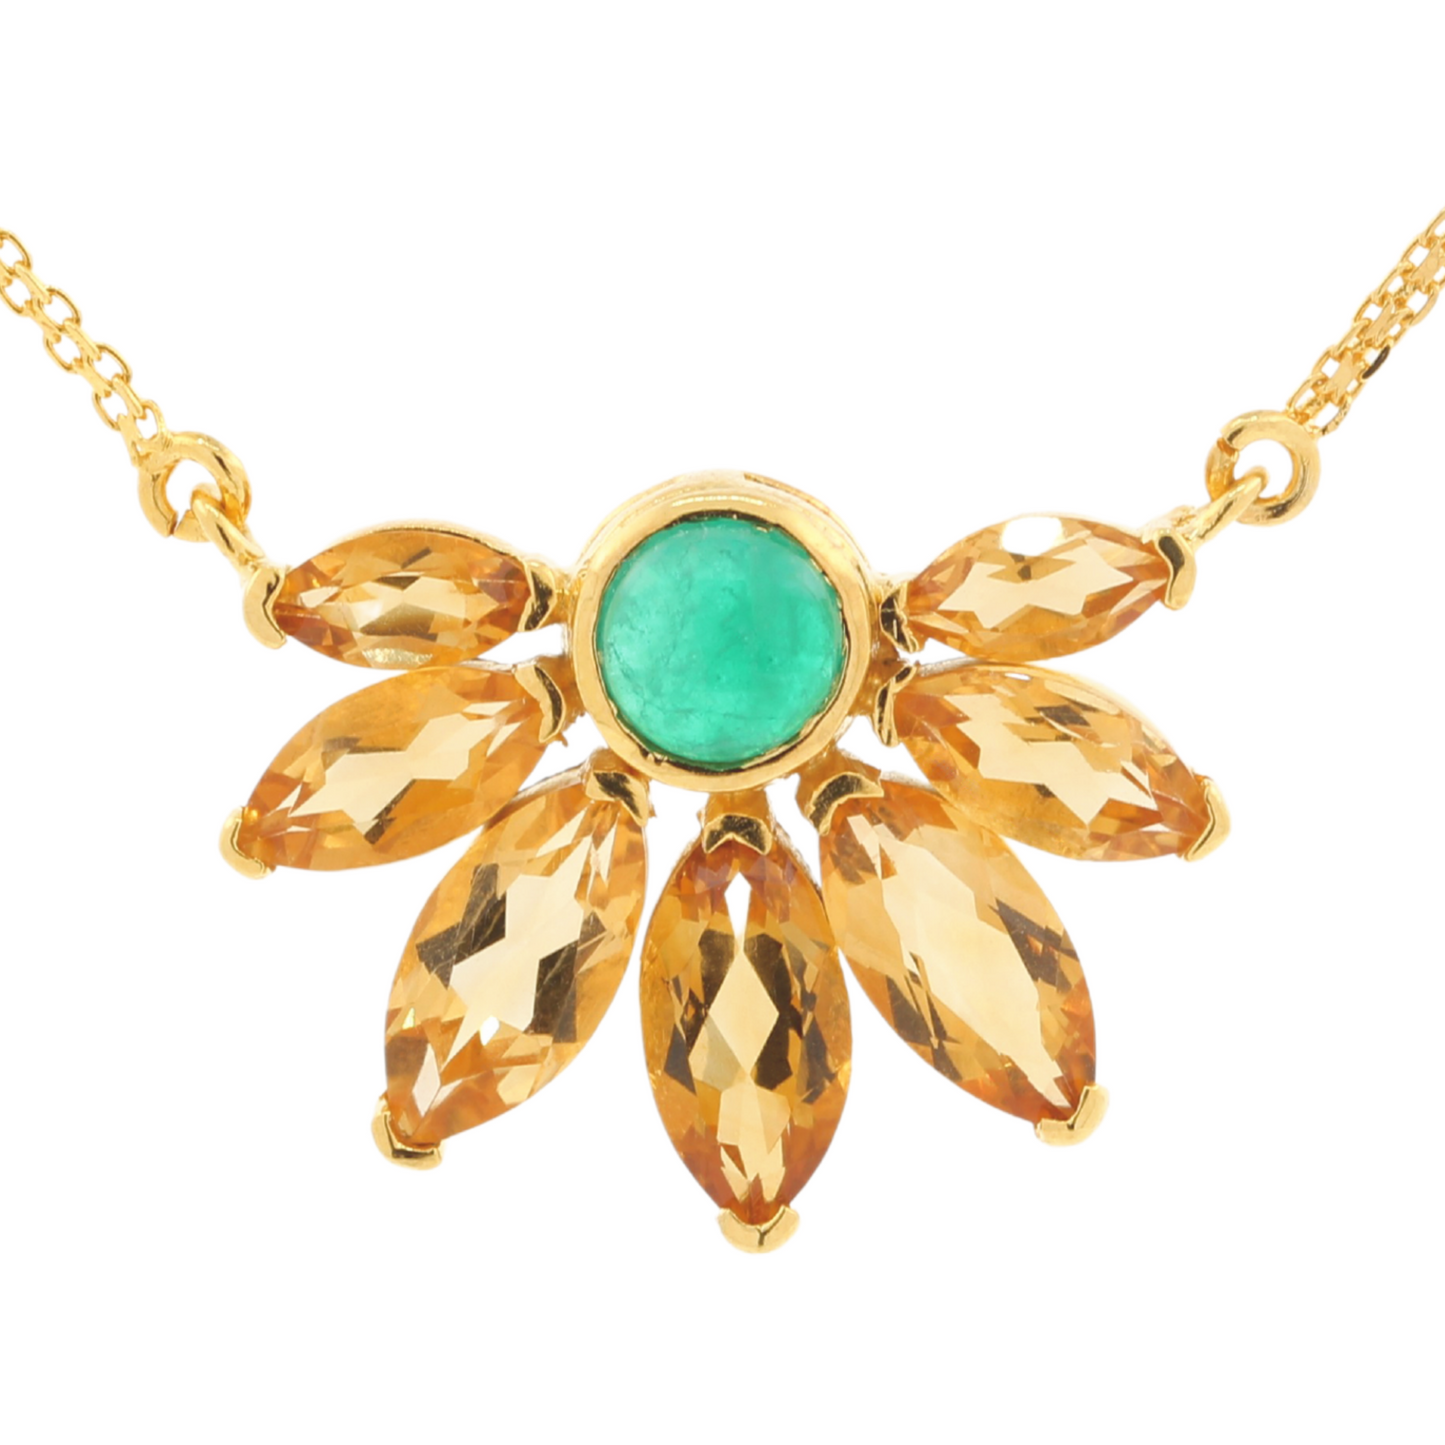 Russian sunflower necklace